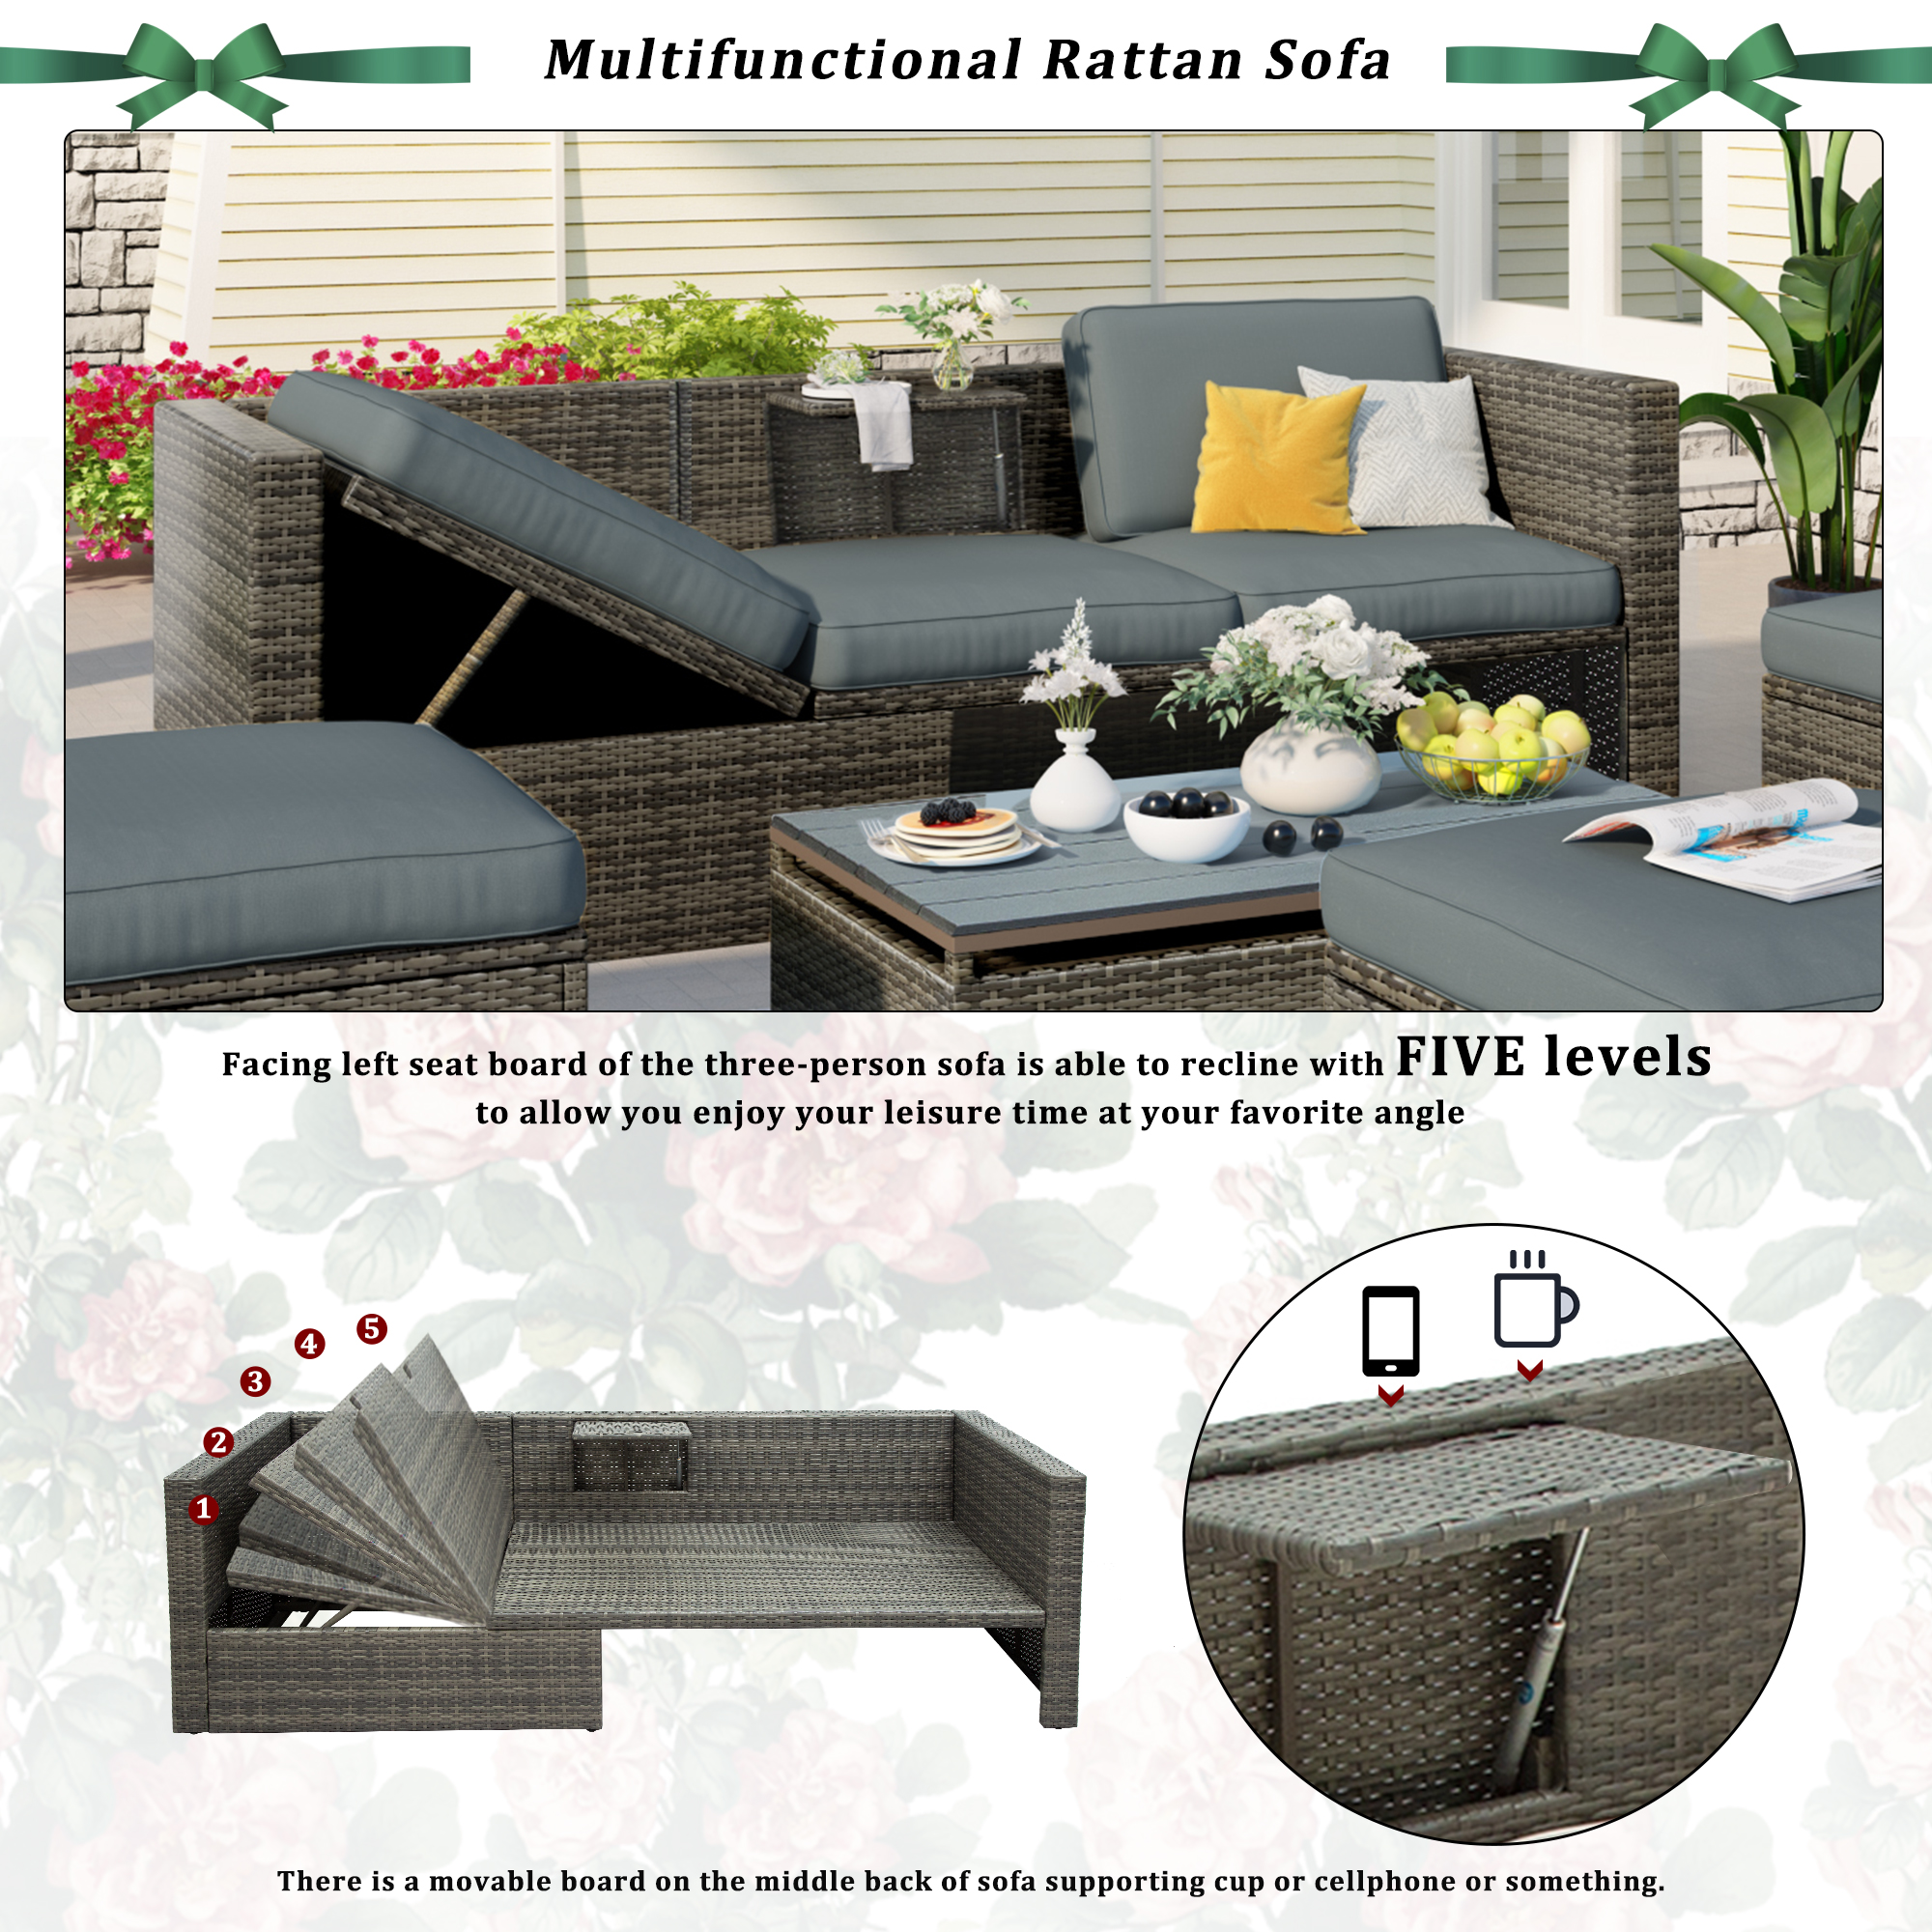 5-Piece Patio Wicker Sofa with Adustable Backrest, Cushions, Ottomans and Lift Top Coffee Table - WY000217EAA